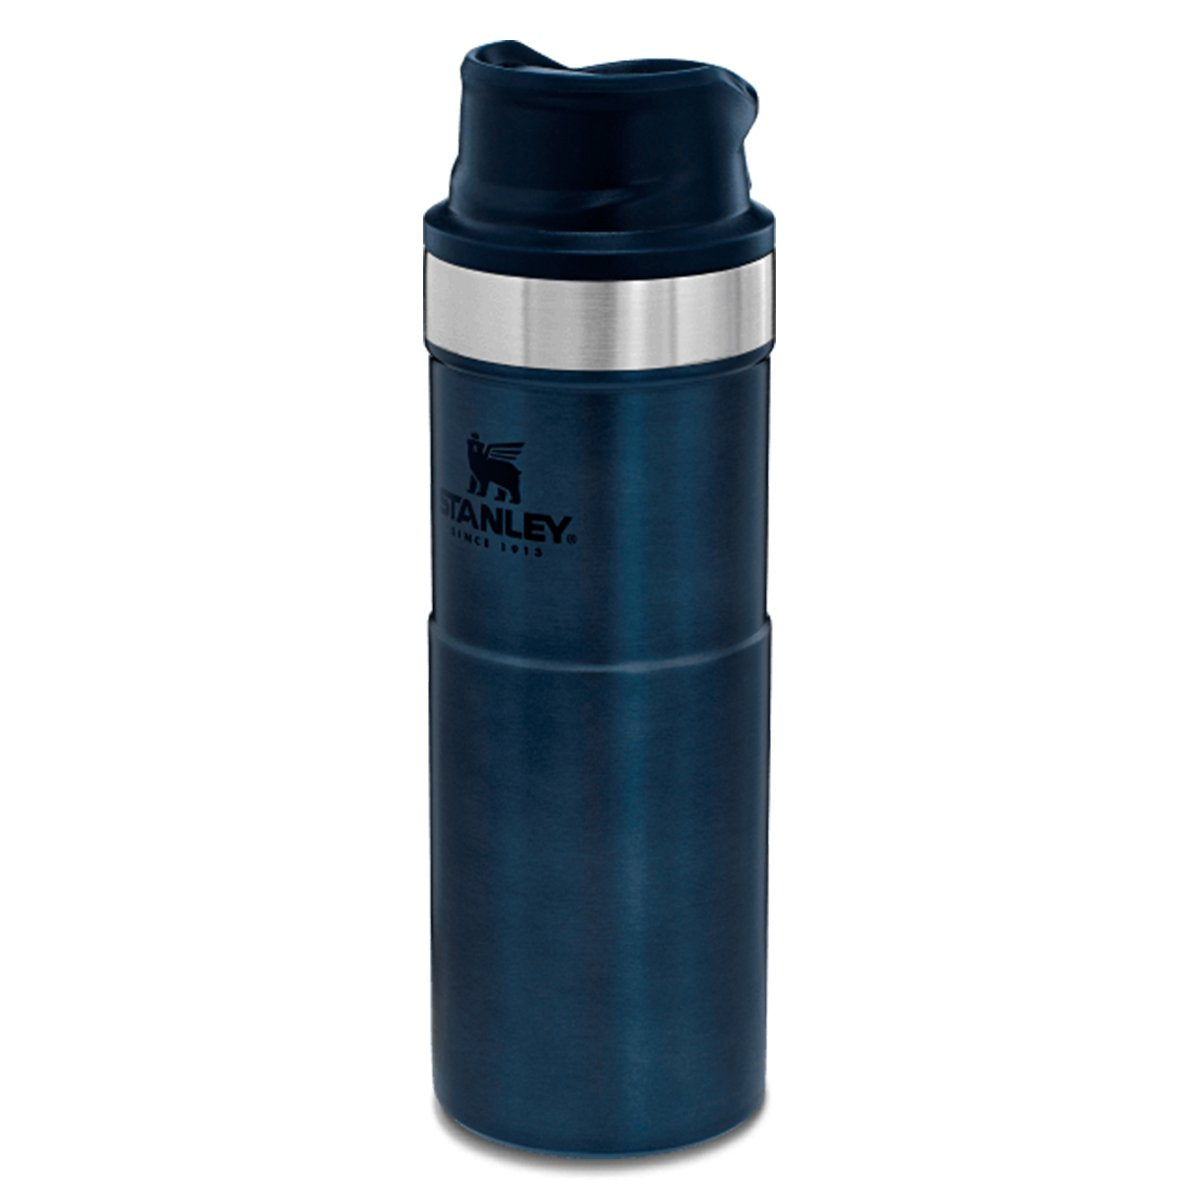 Stanley Classic Trigger-Action Travel Mug 12oz Review (2 Weeks of